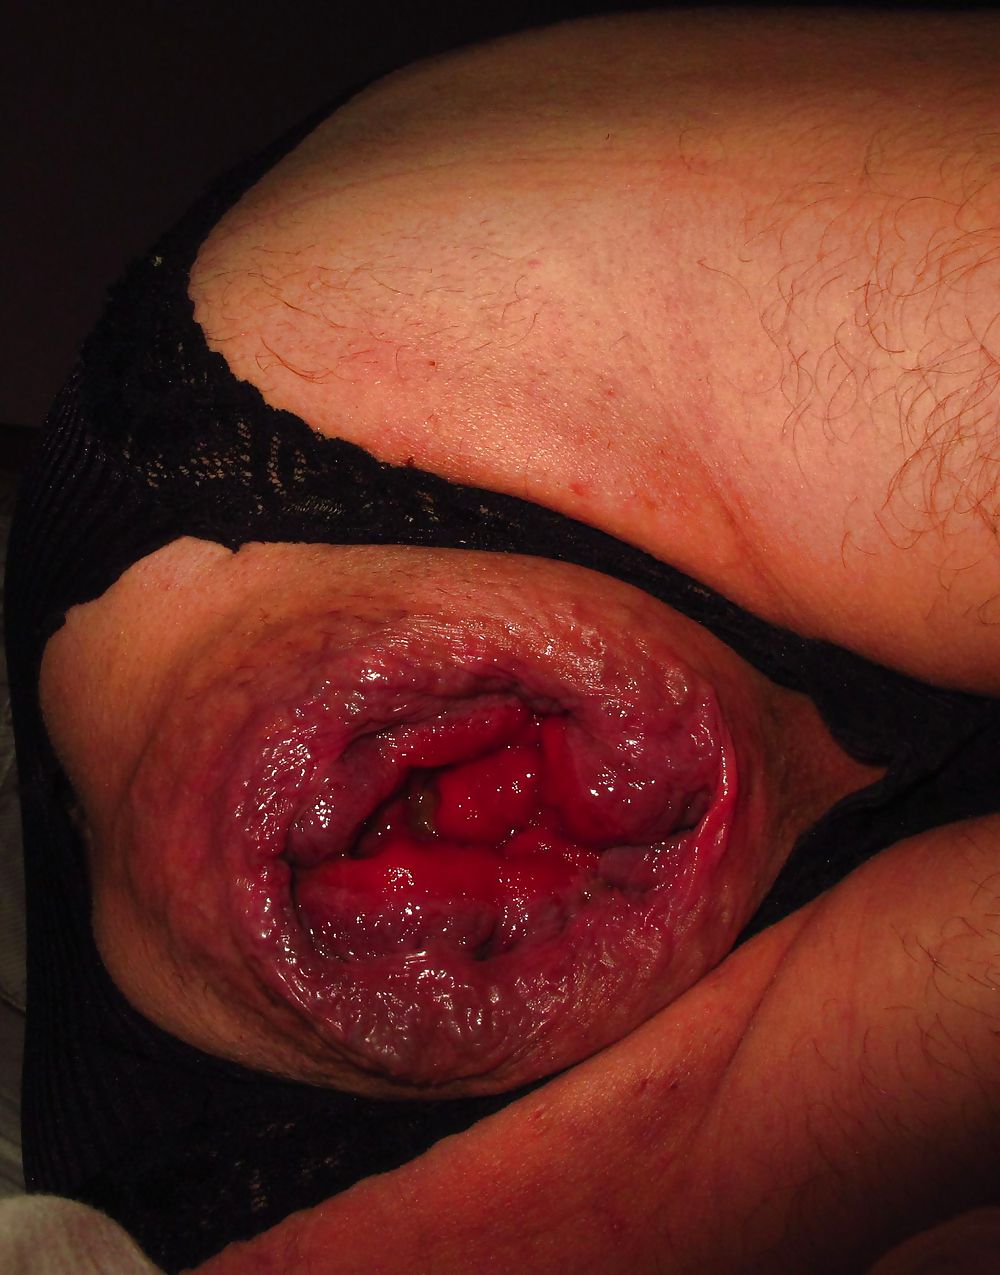 Extreme prolapse gape asshole by Marques #9965726